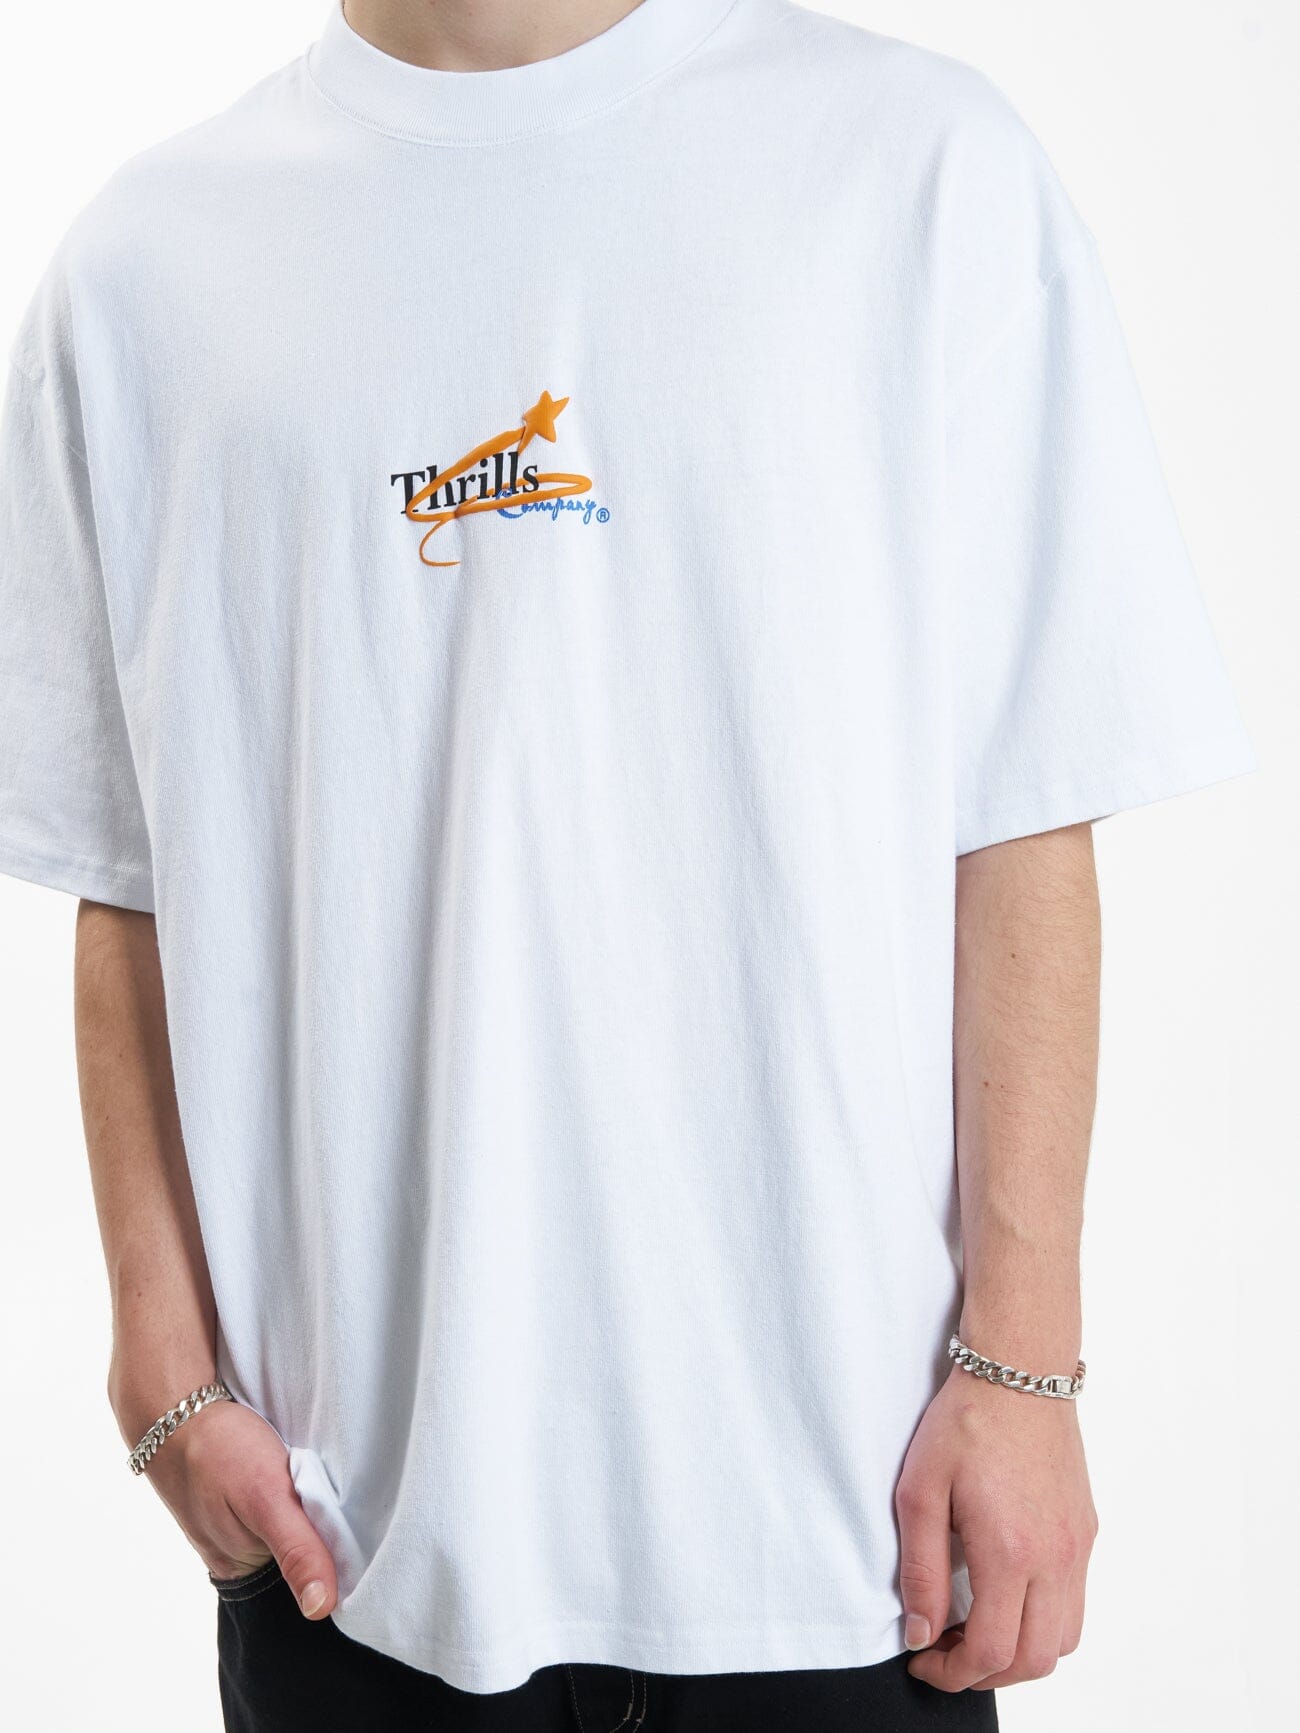 Earthdrone Box Fit Oversize Tee - White